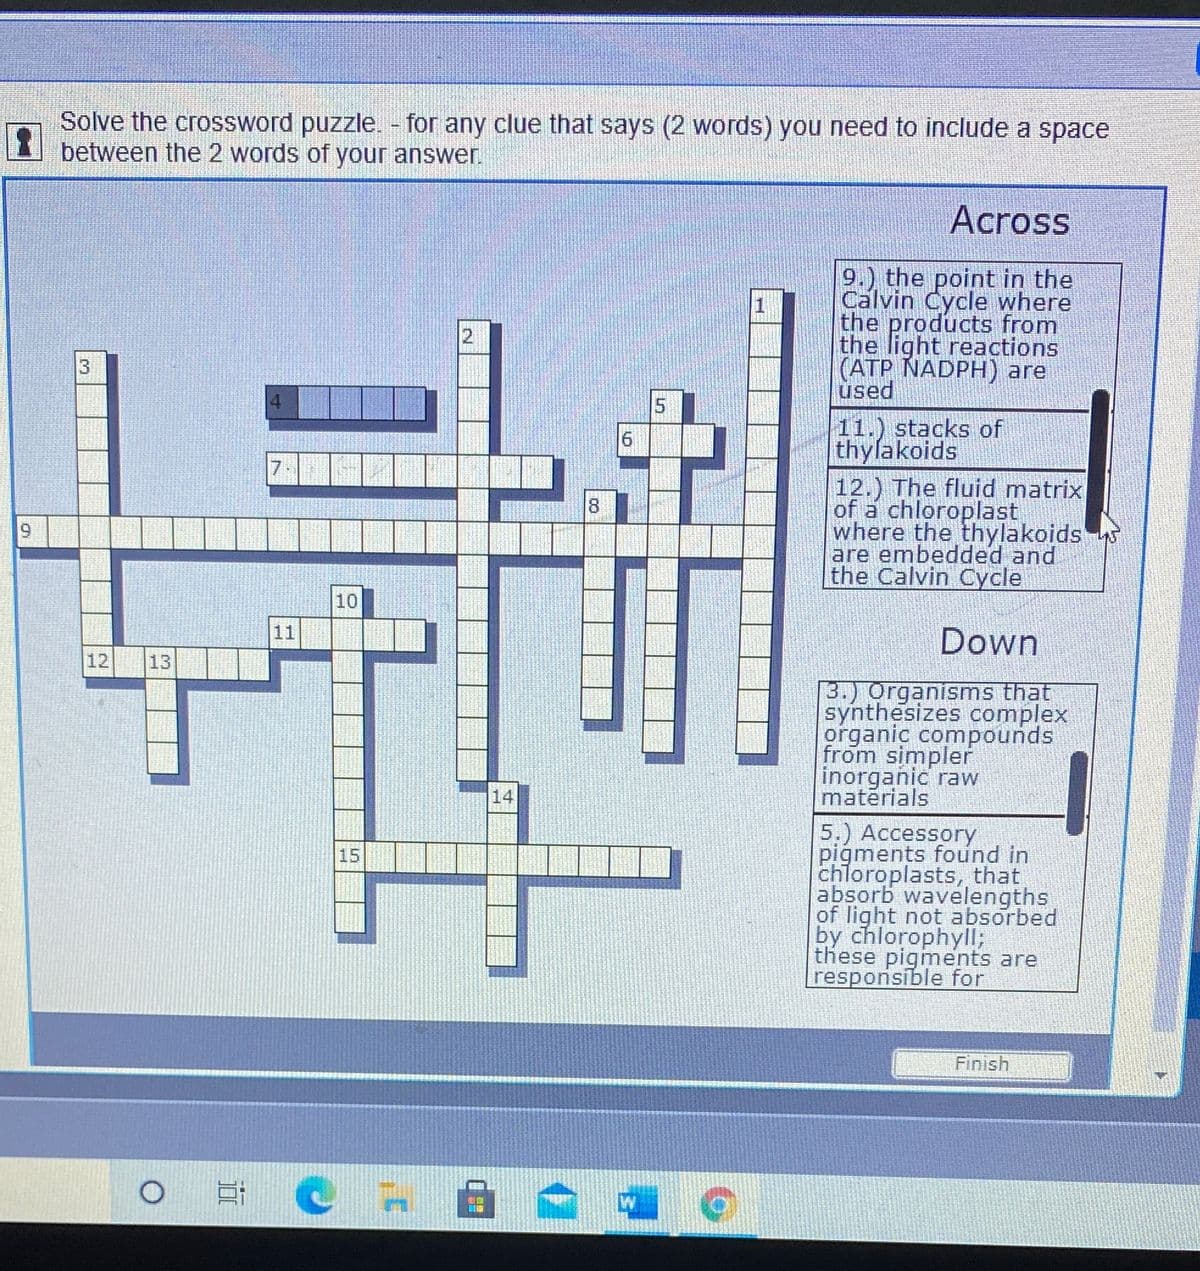 Solve the crossword puzzle. - for any clue that says (2 words) you need to include a space
between the 2 words of your answer.
Across
9.) the point in the
Calvin Cycle where
the products from
the light reactions
(ATP NADPH) are
used
2
4.
11.) stacks of
thylakoids
12.) The fluid matrix
of a chloroplast
where the thylakoids
are embedded and
the Calvin Cycle
7
10
11
Down
12
13
3.) Organisms that
synthesizes complex
organic compounds
from simpler
inorganic raw
materials
14
5.) Accessory
pigments found in
chloroplasts, that
absorb wavelengths
of light not absorbed
by chlorophyll;
these pigments are
responsible for
15
Finish
Et C
8.
